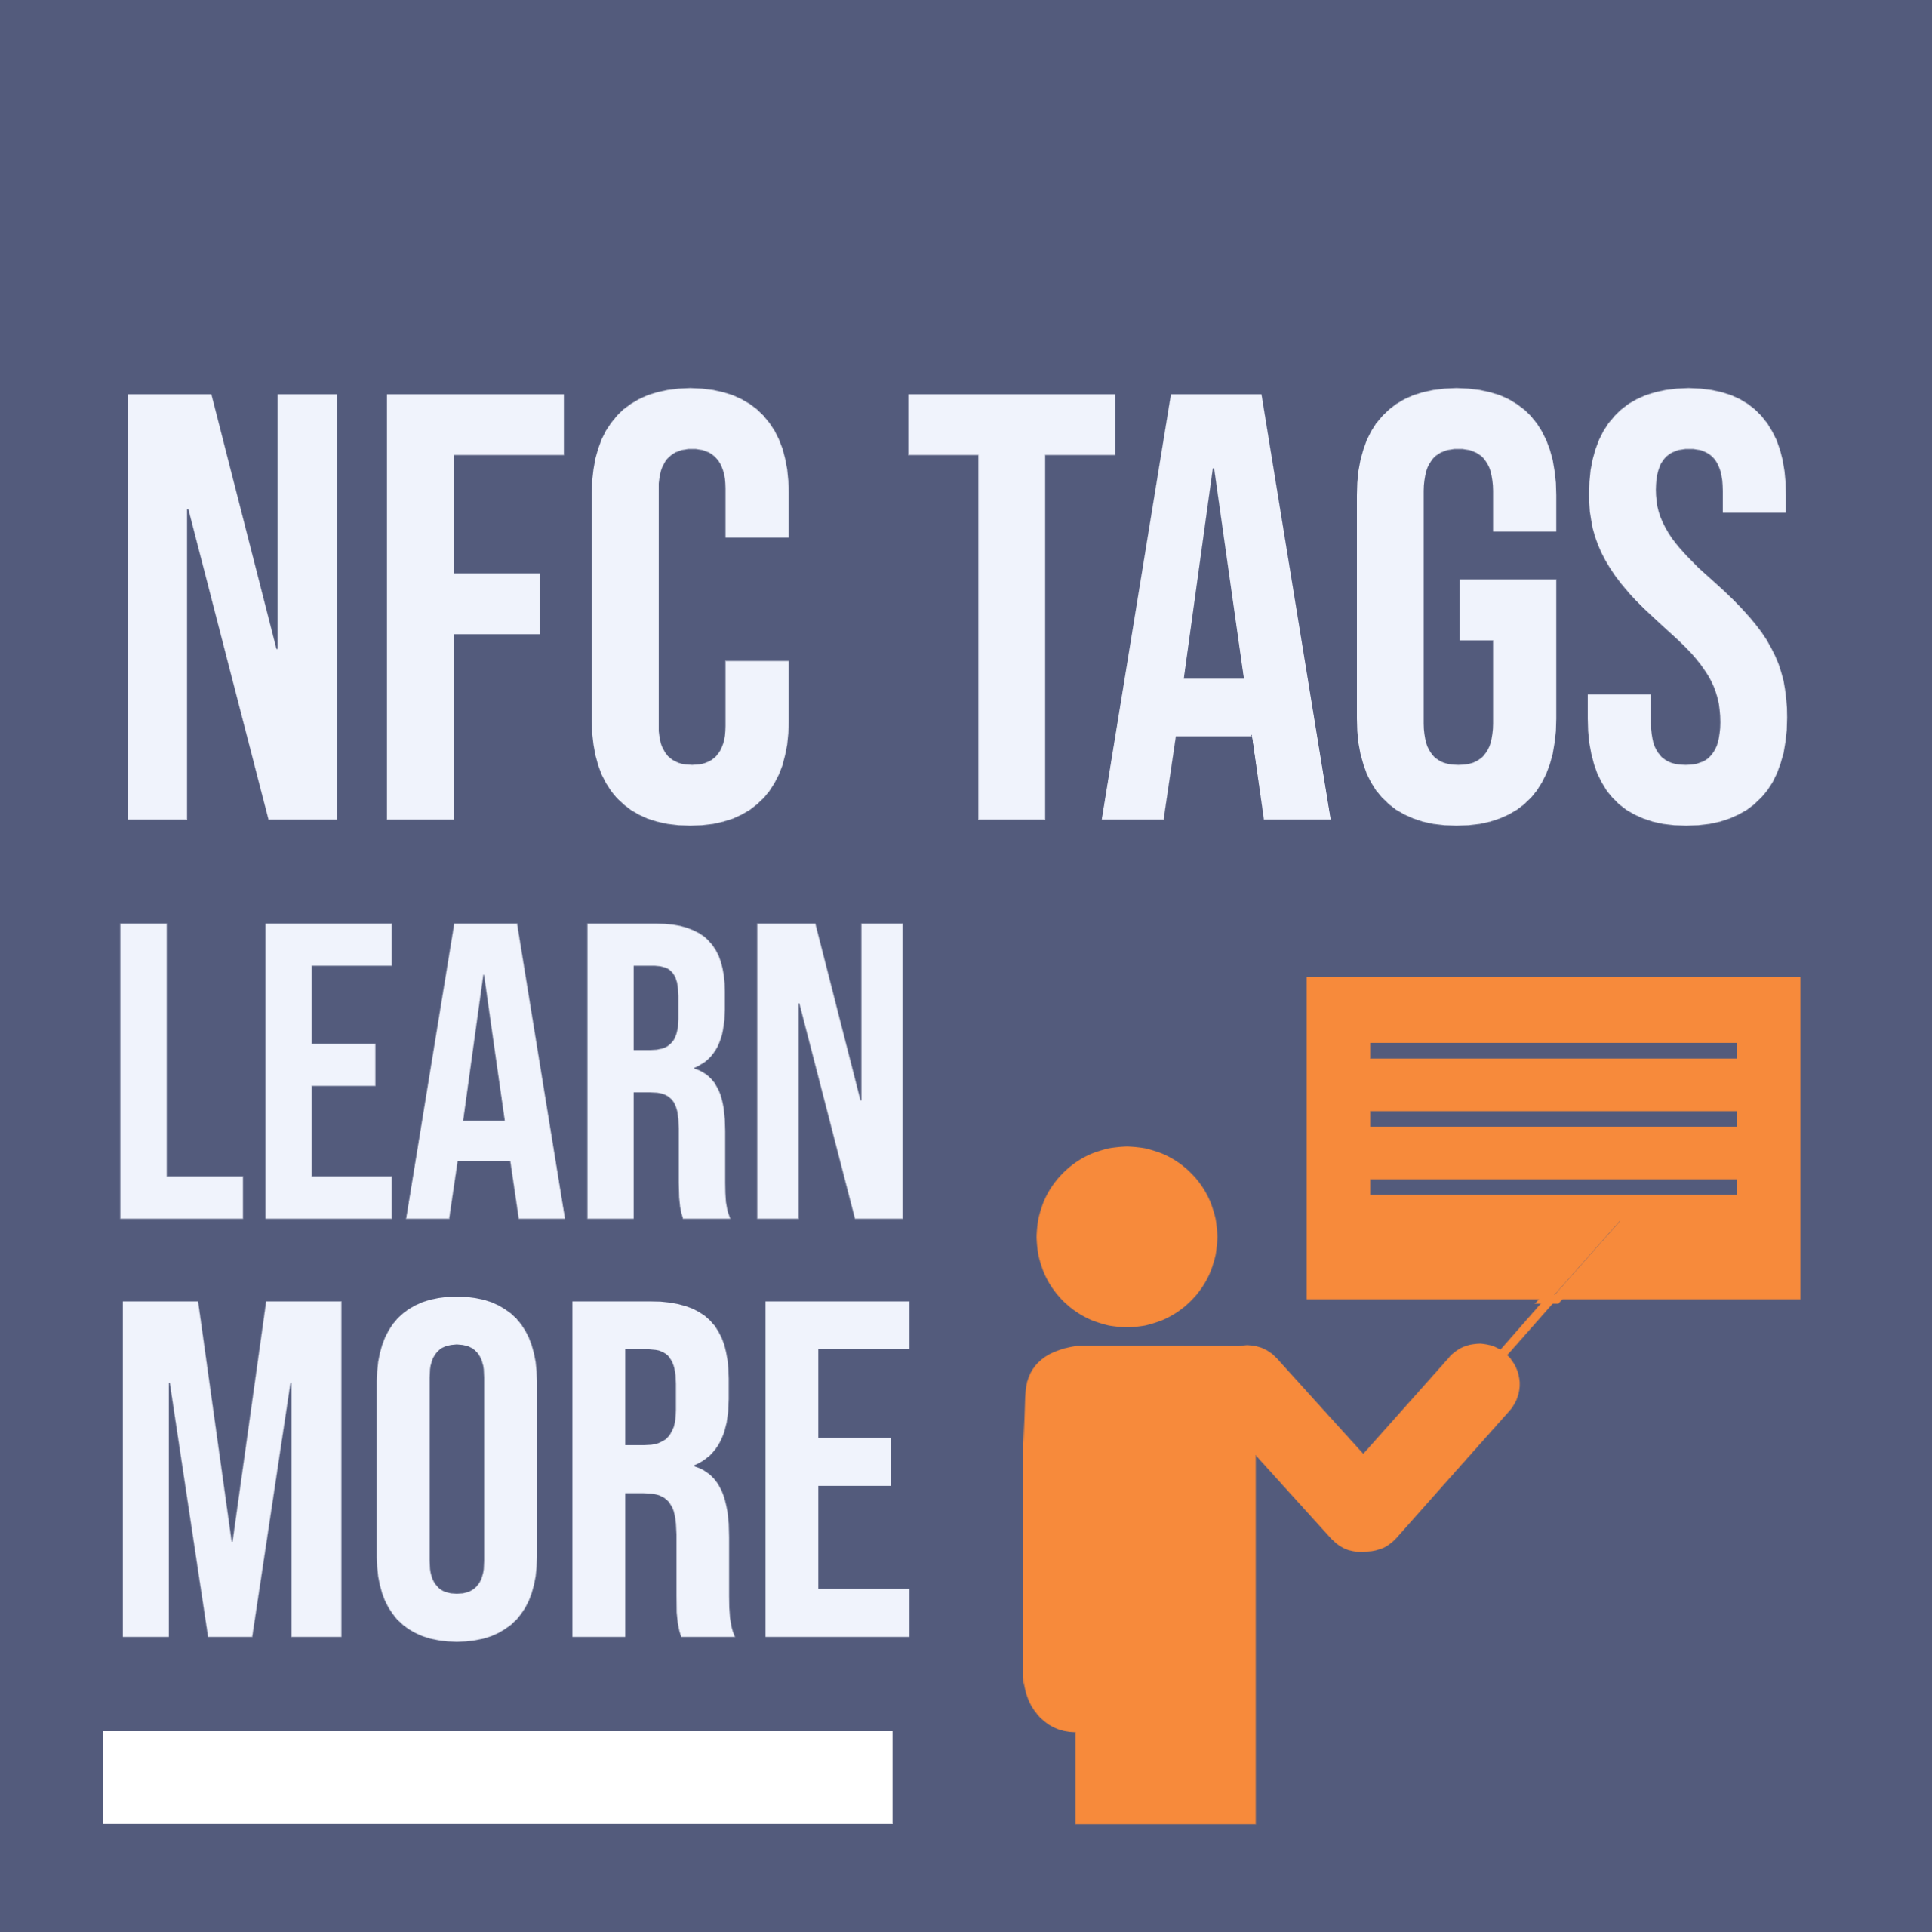 Learn more about NFC tags and their uses